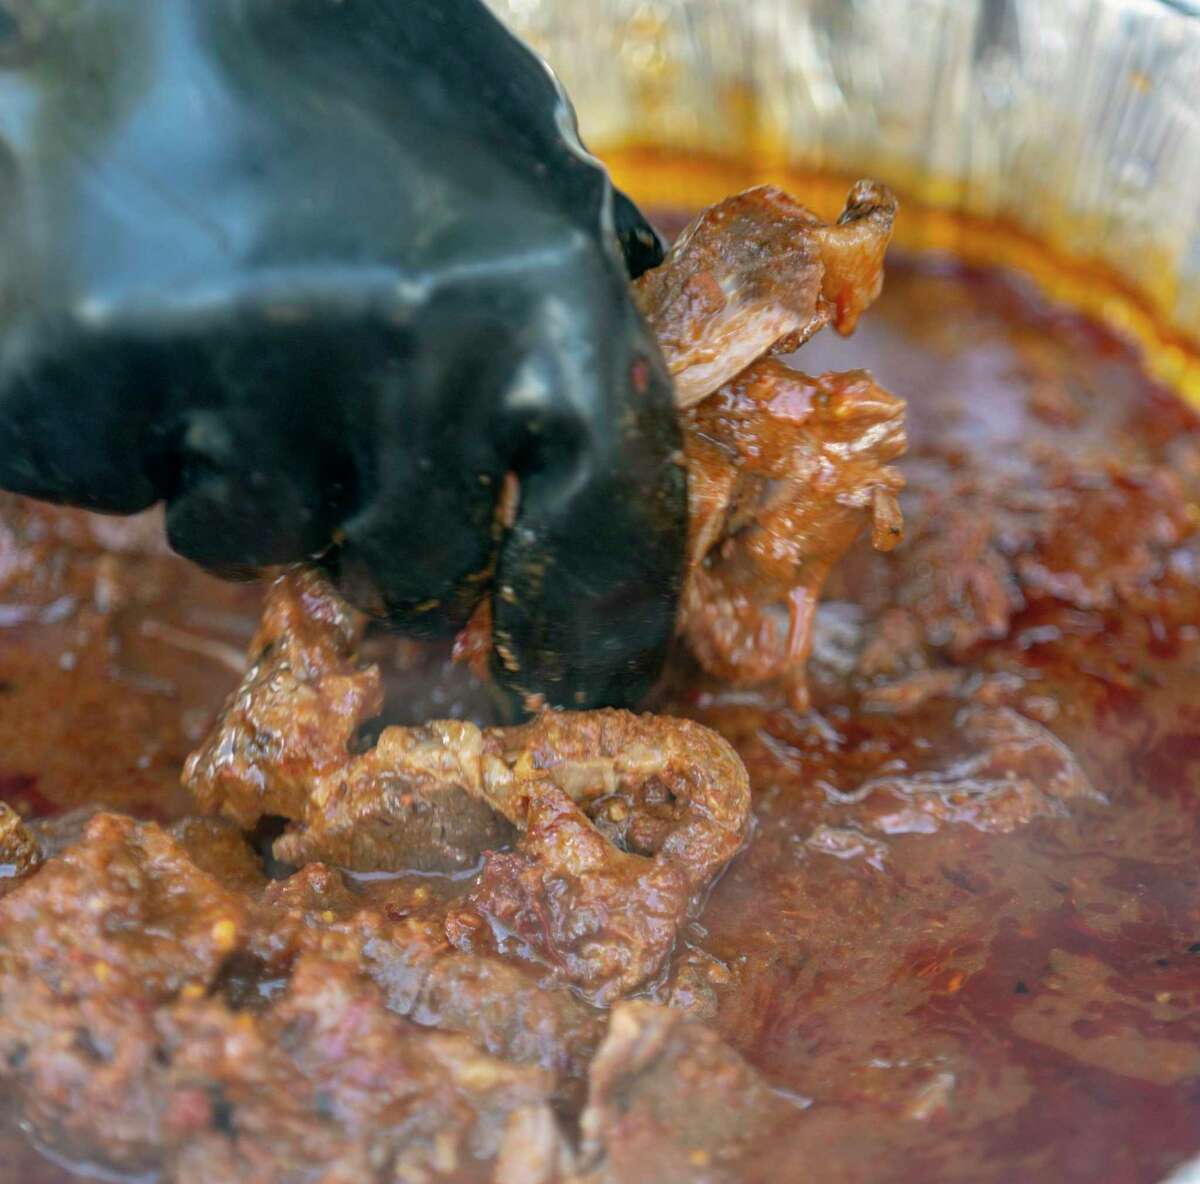 The beef in finished birria can be pulled apart with your hands.